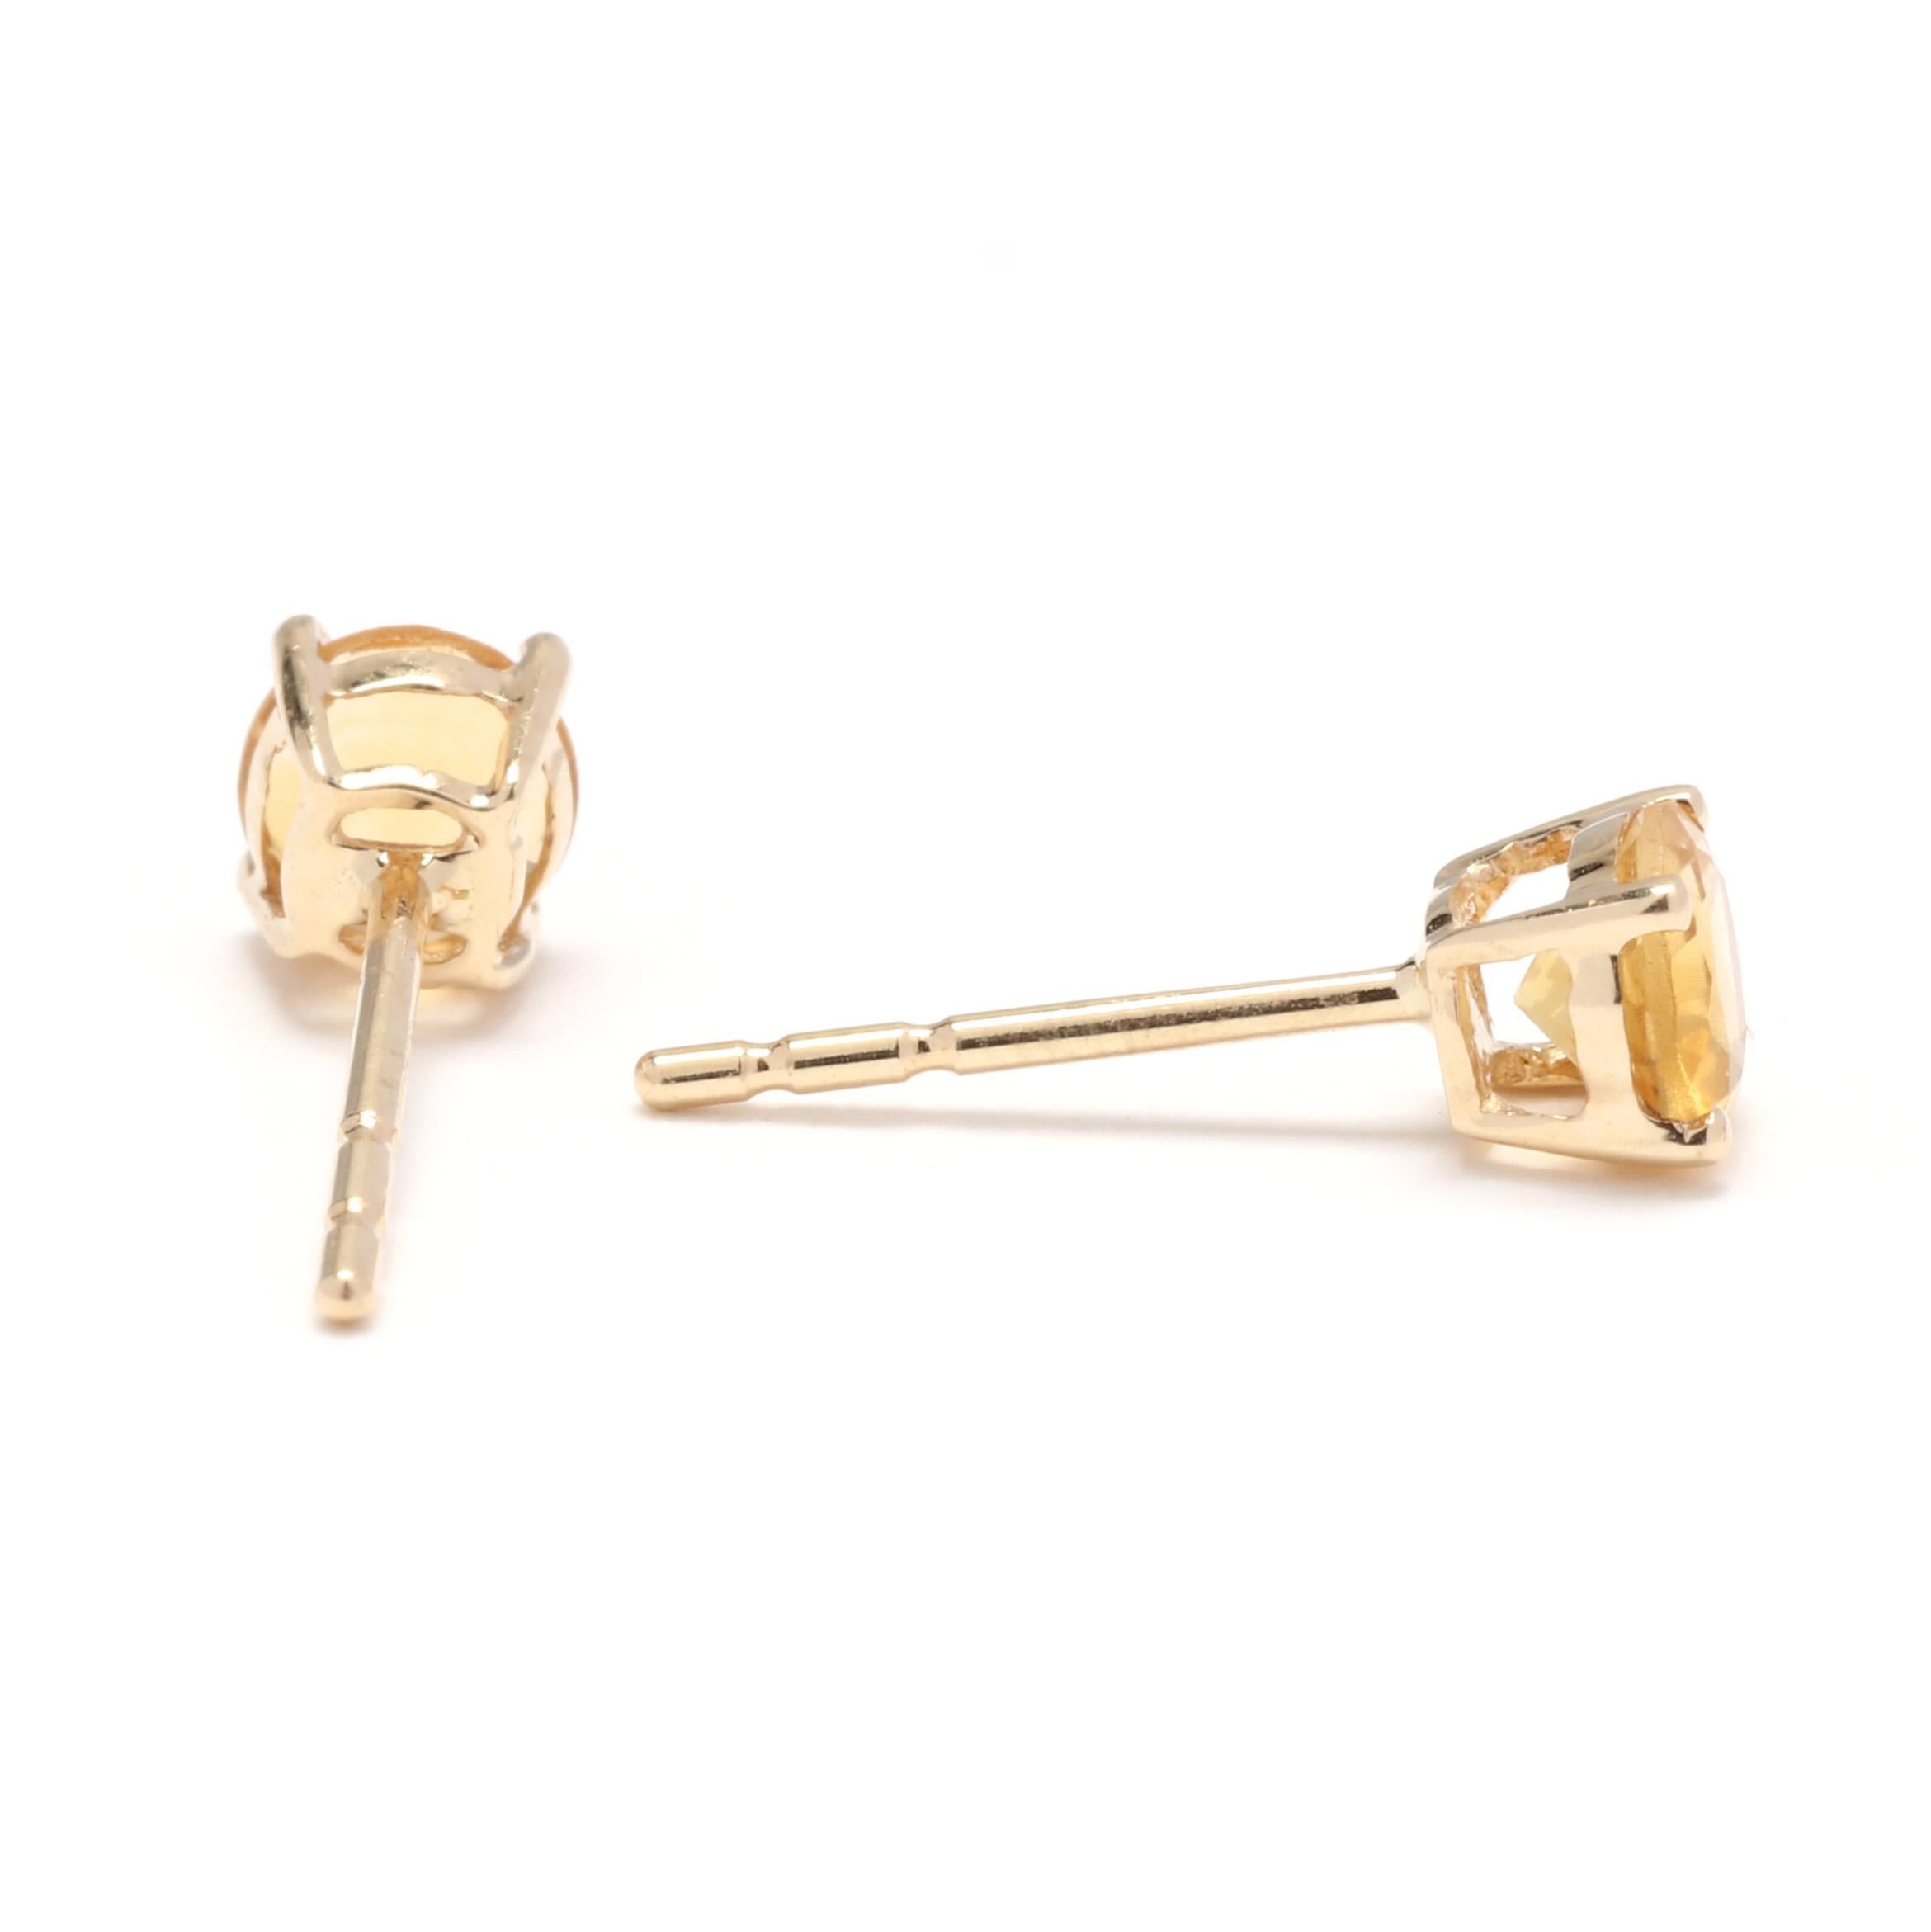 A pair of vintage 14 karat yellow gold round citrine solitaire stud earrings. These November birthstone earrings feature prong set, round cut citrines weighing approximately .50 total carat and with pierced push backs.

Stones:
- citrine, 2 stones
-